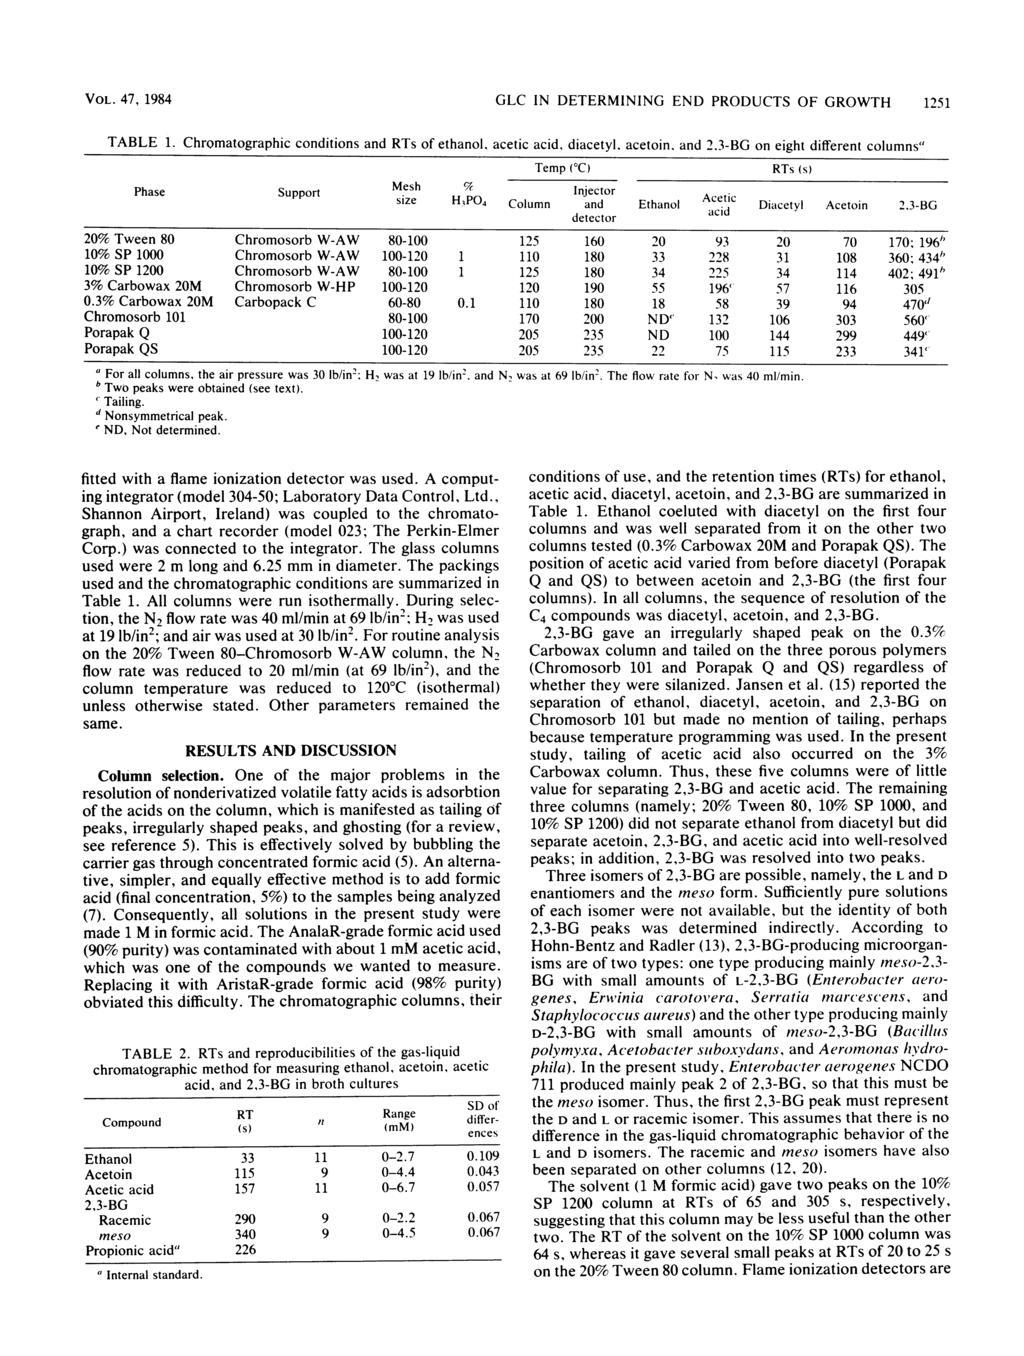 VOL. 47, 1984 GLC IN DETERMINING END PRODUCTS OF GROWTH 1251 TABLE 1.